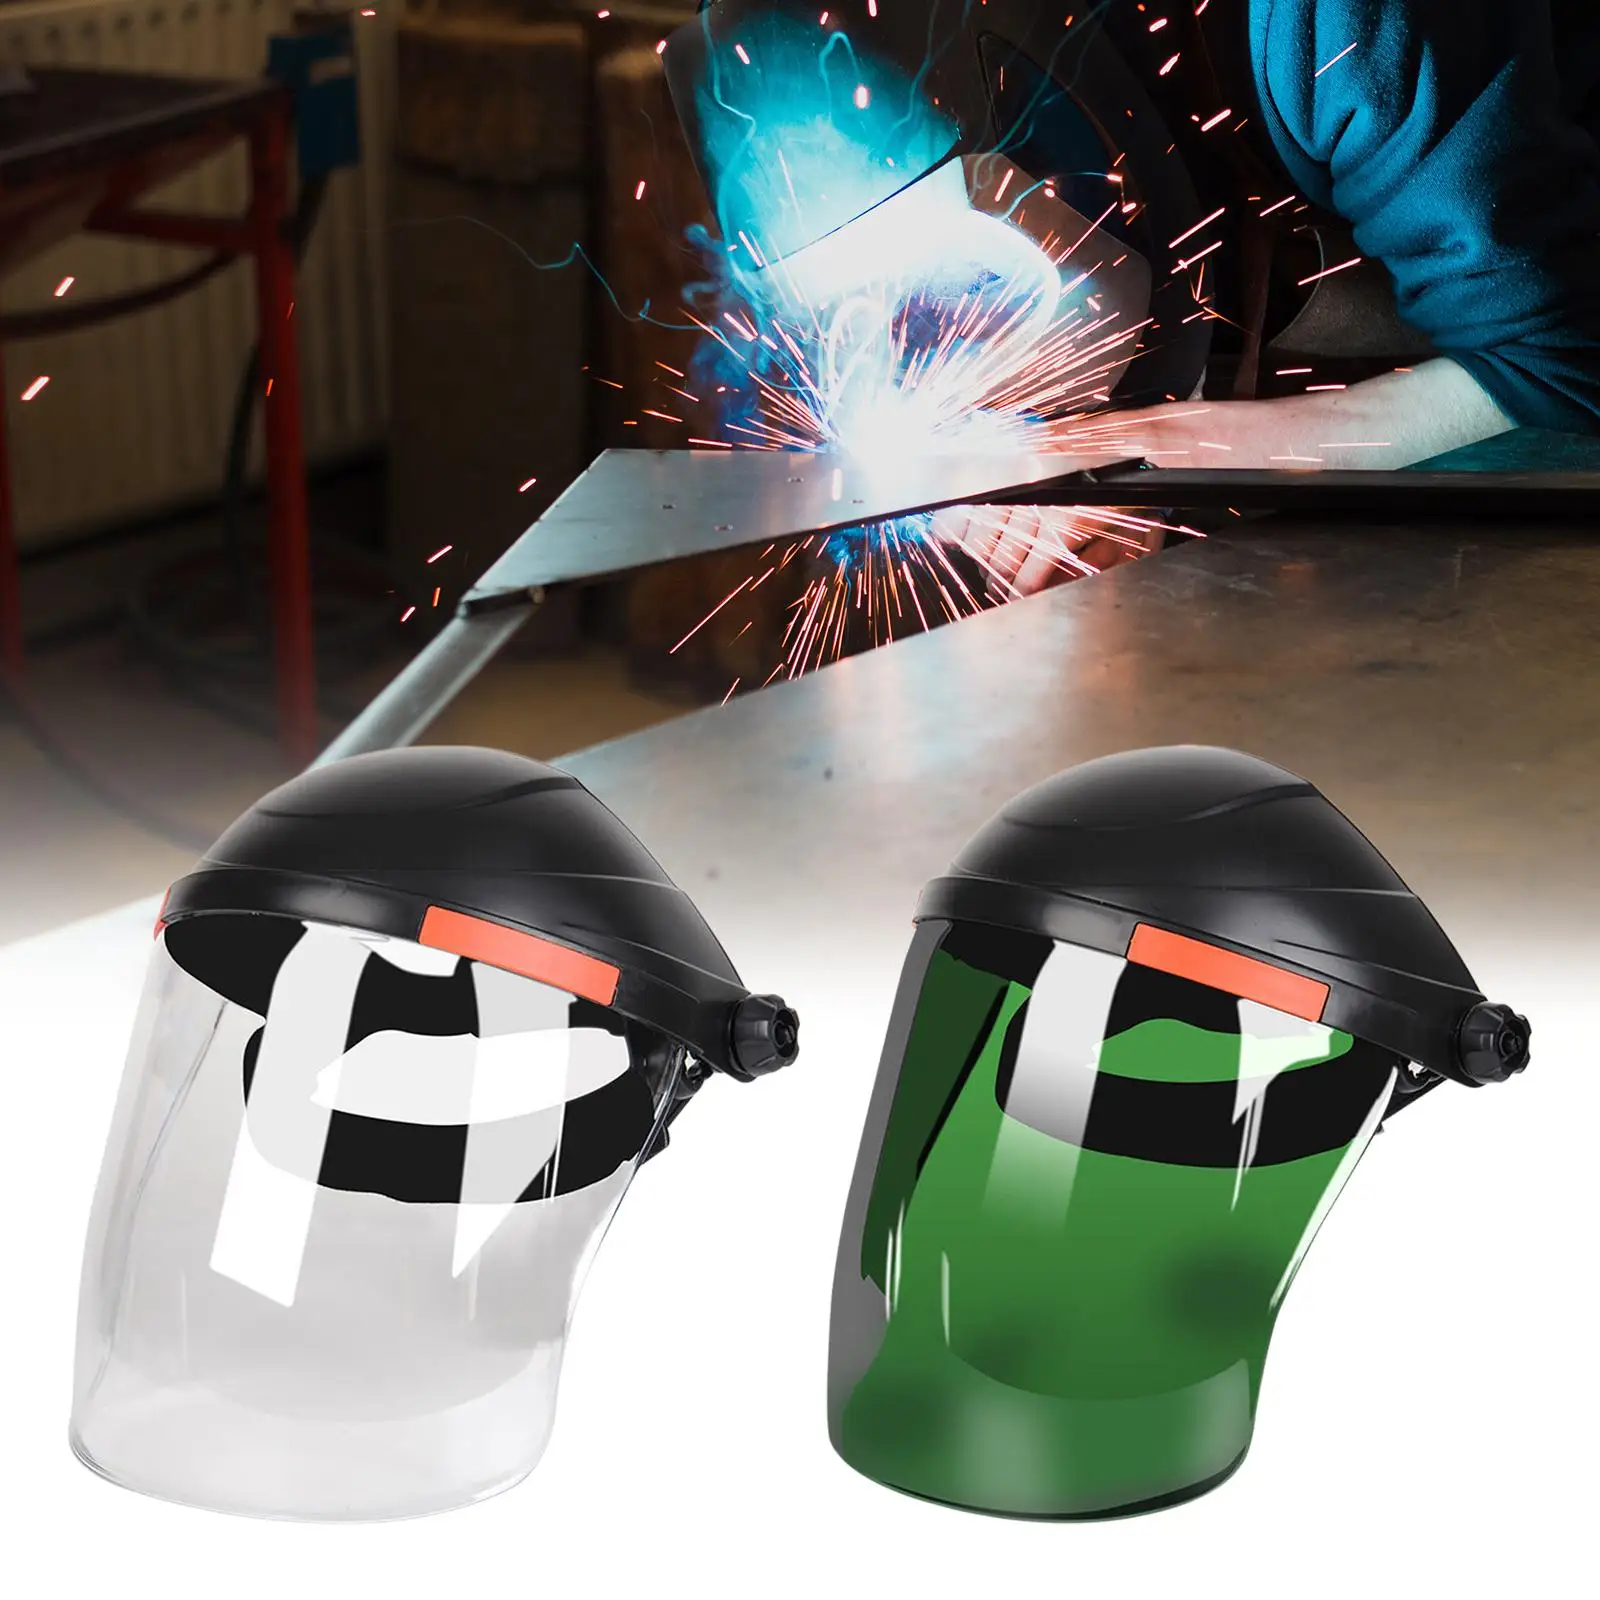 Face Protector Heat Resistant Head Mounted for Outdoor Maintenance Repair